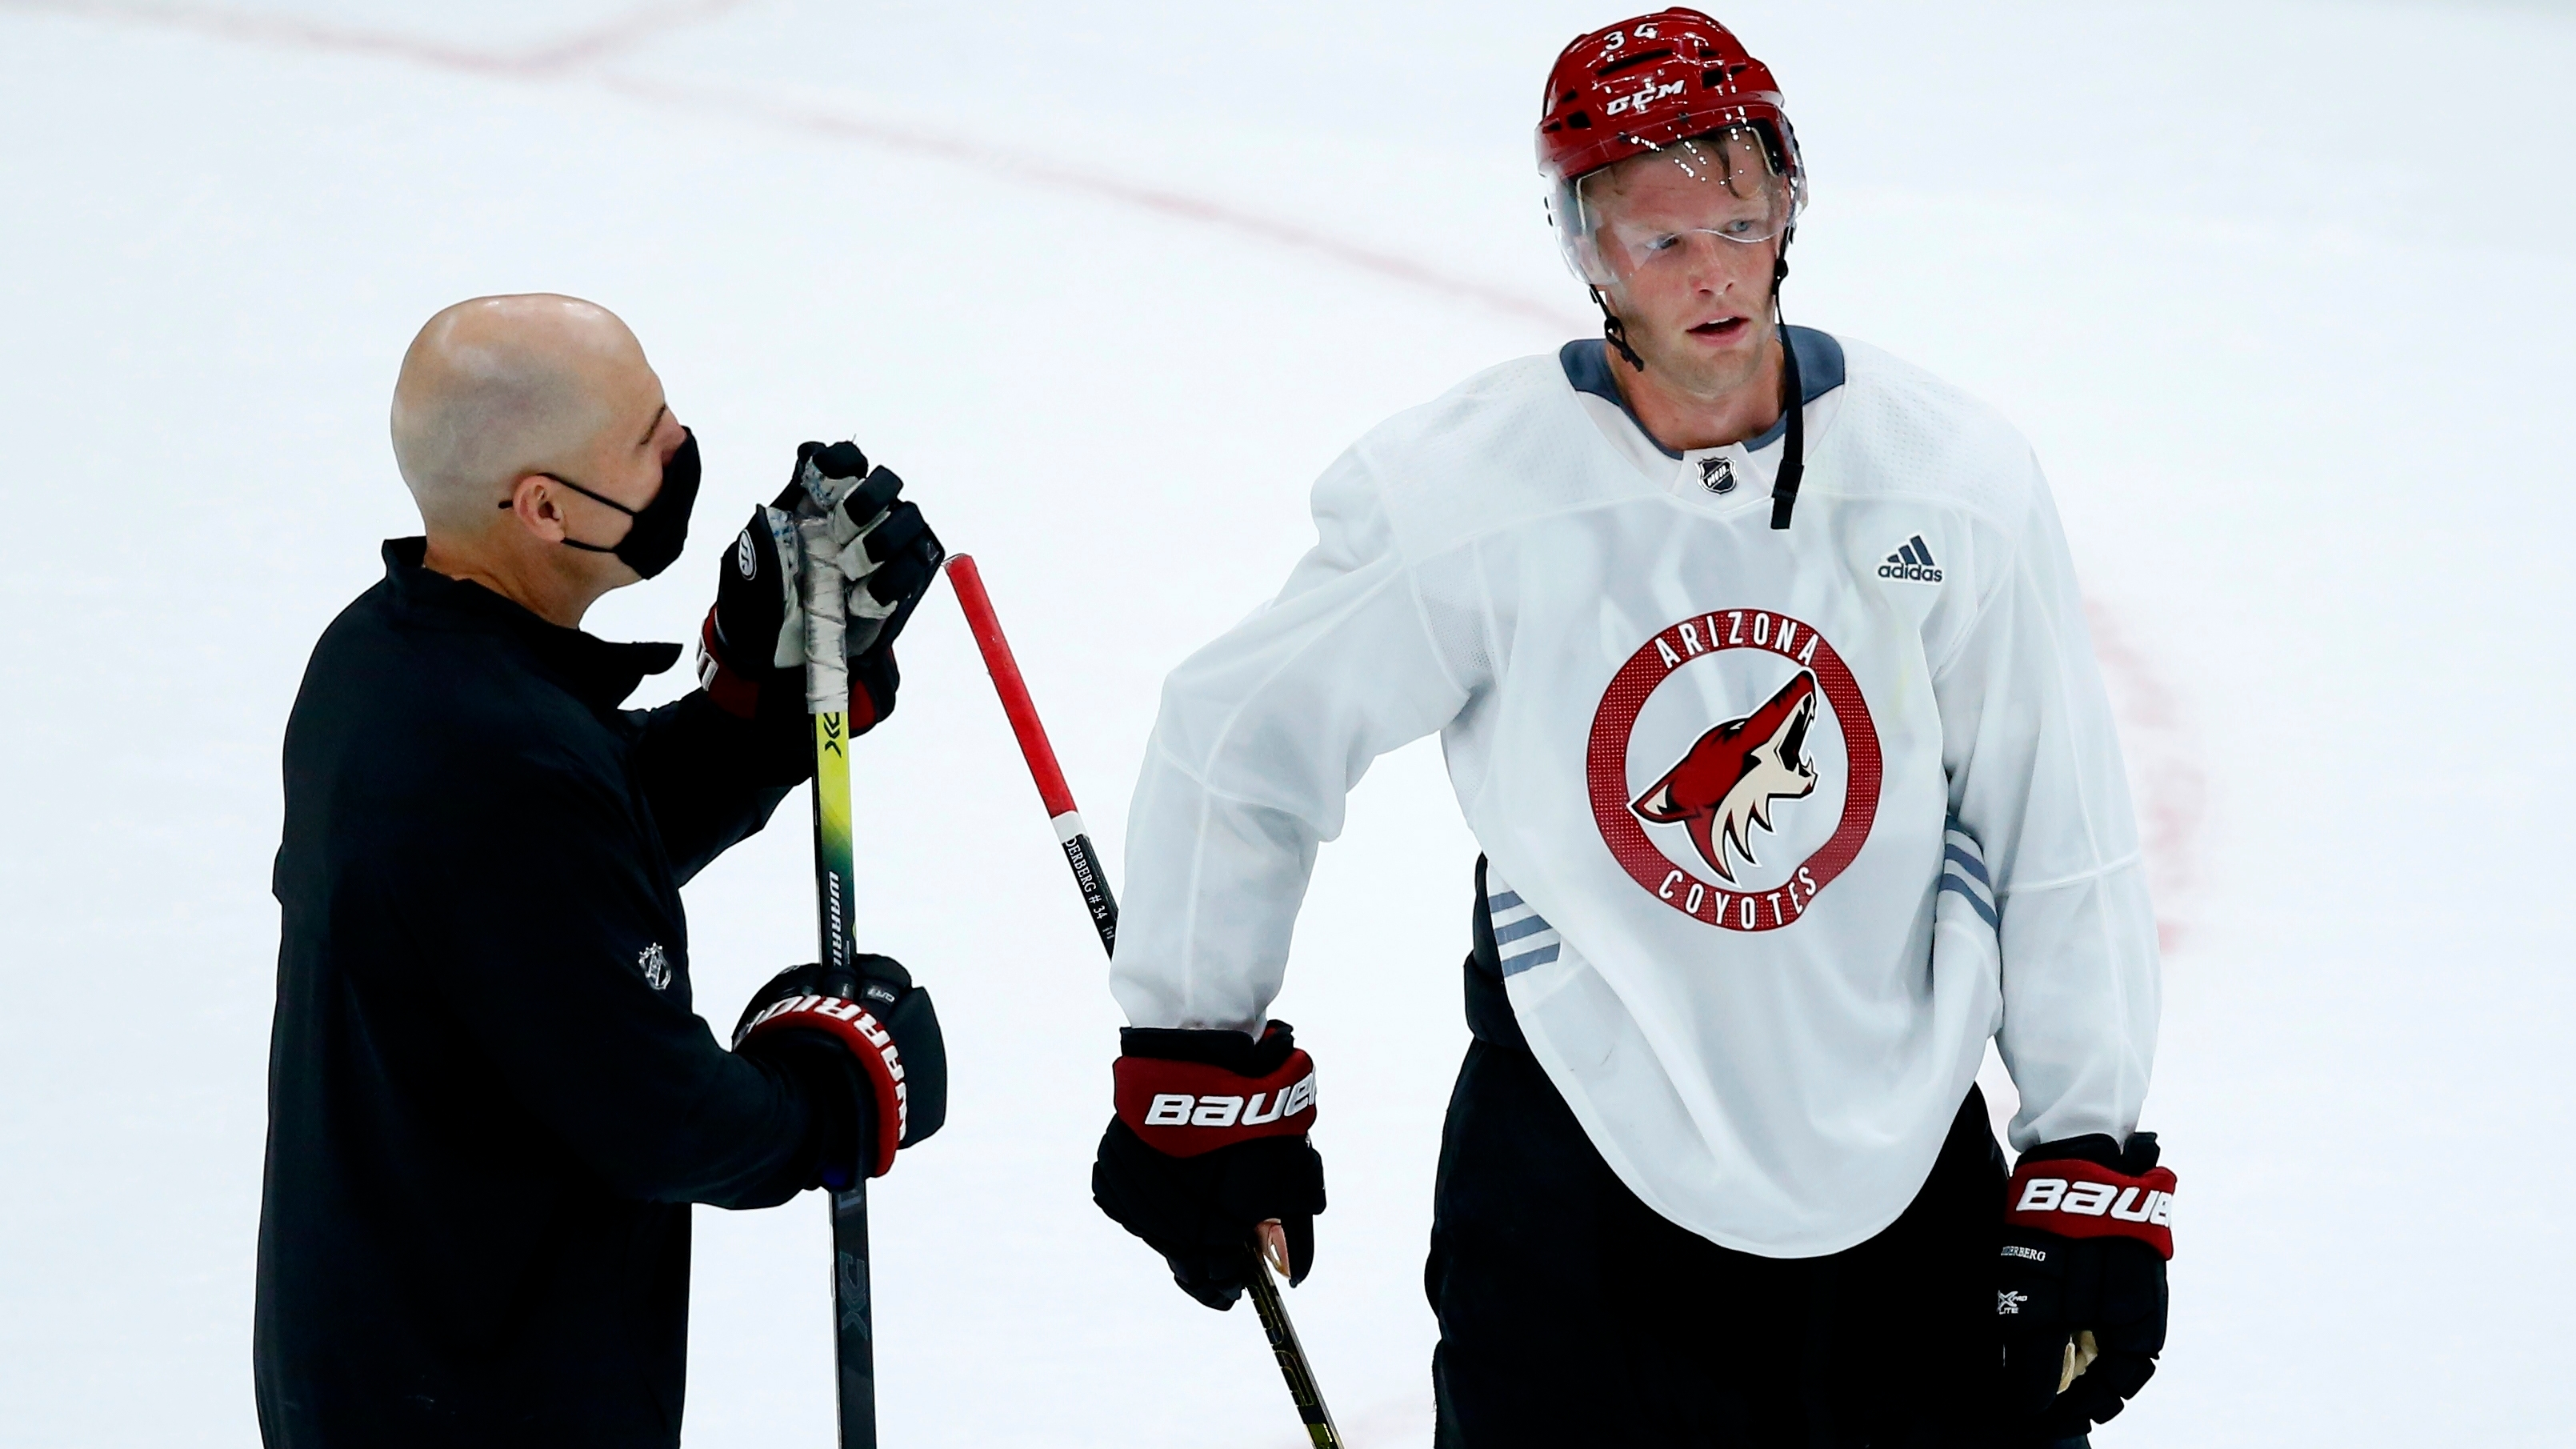 Arizona Coyotes to return for voluntary small-group workouts